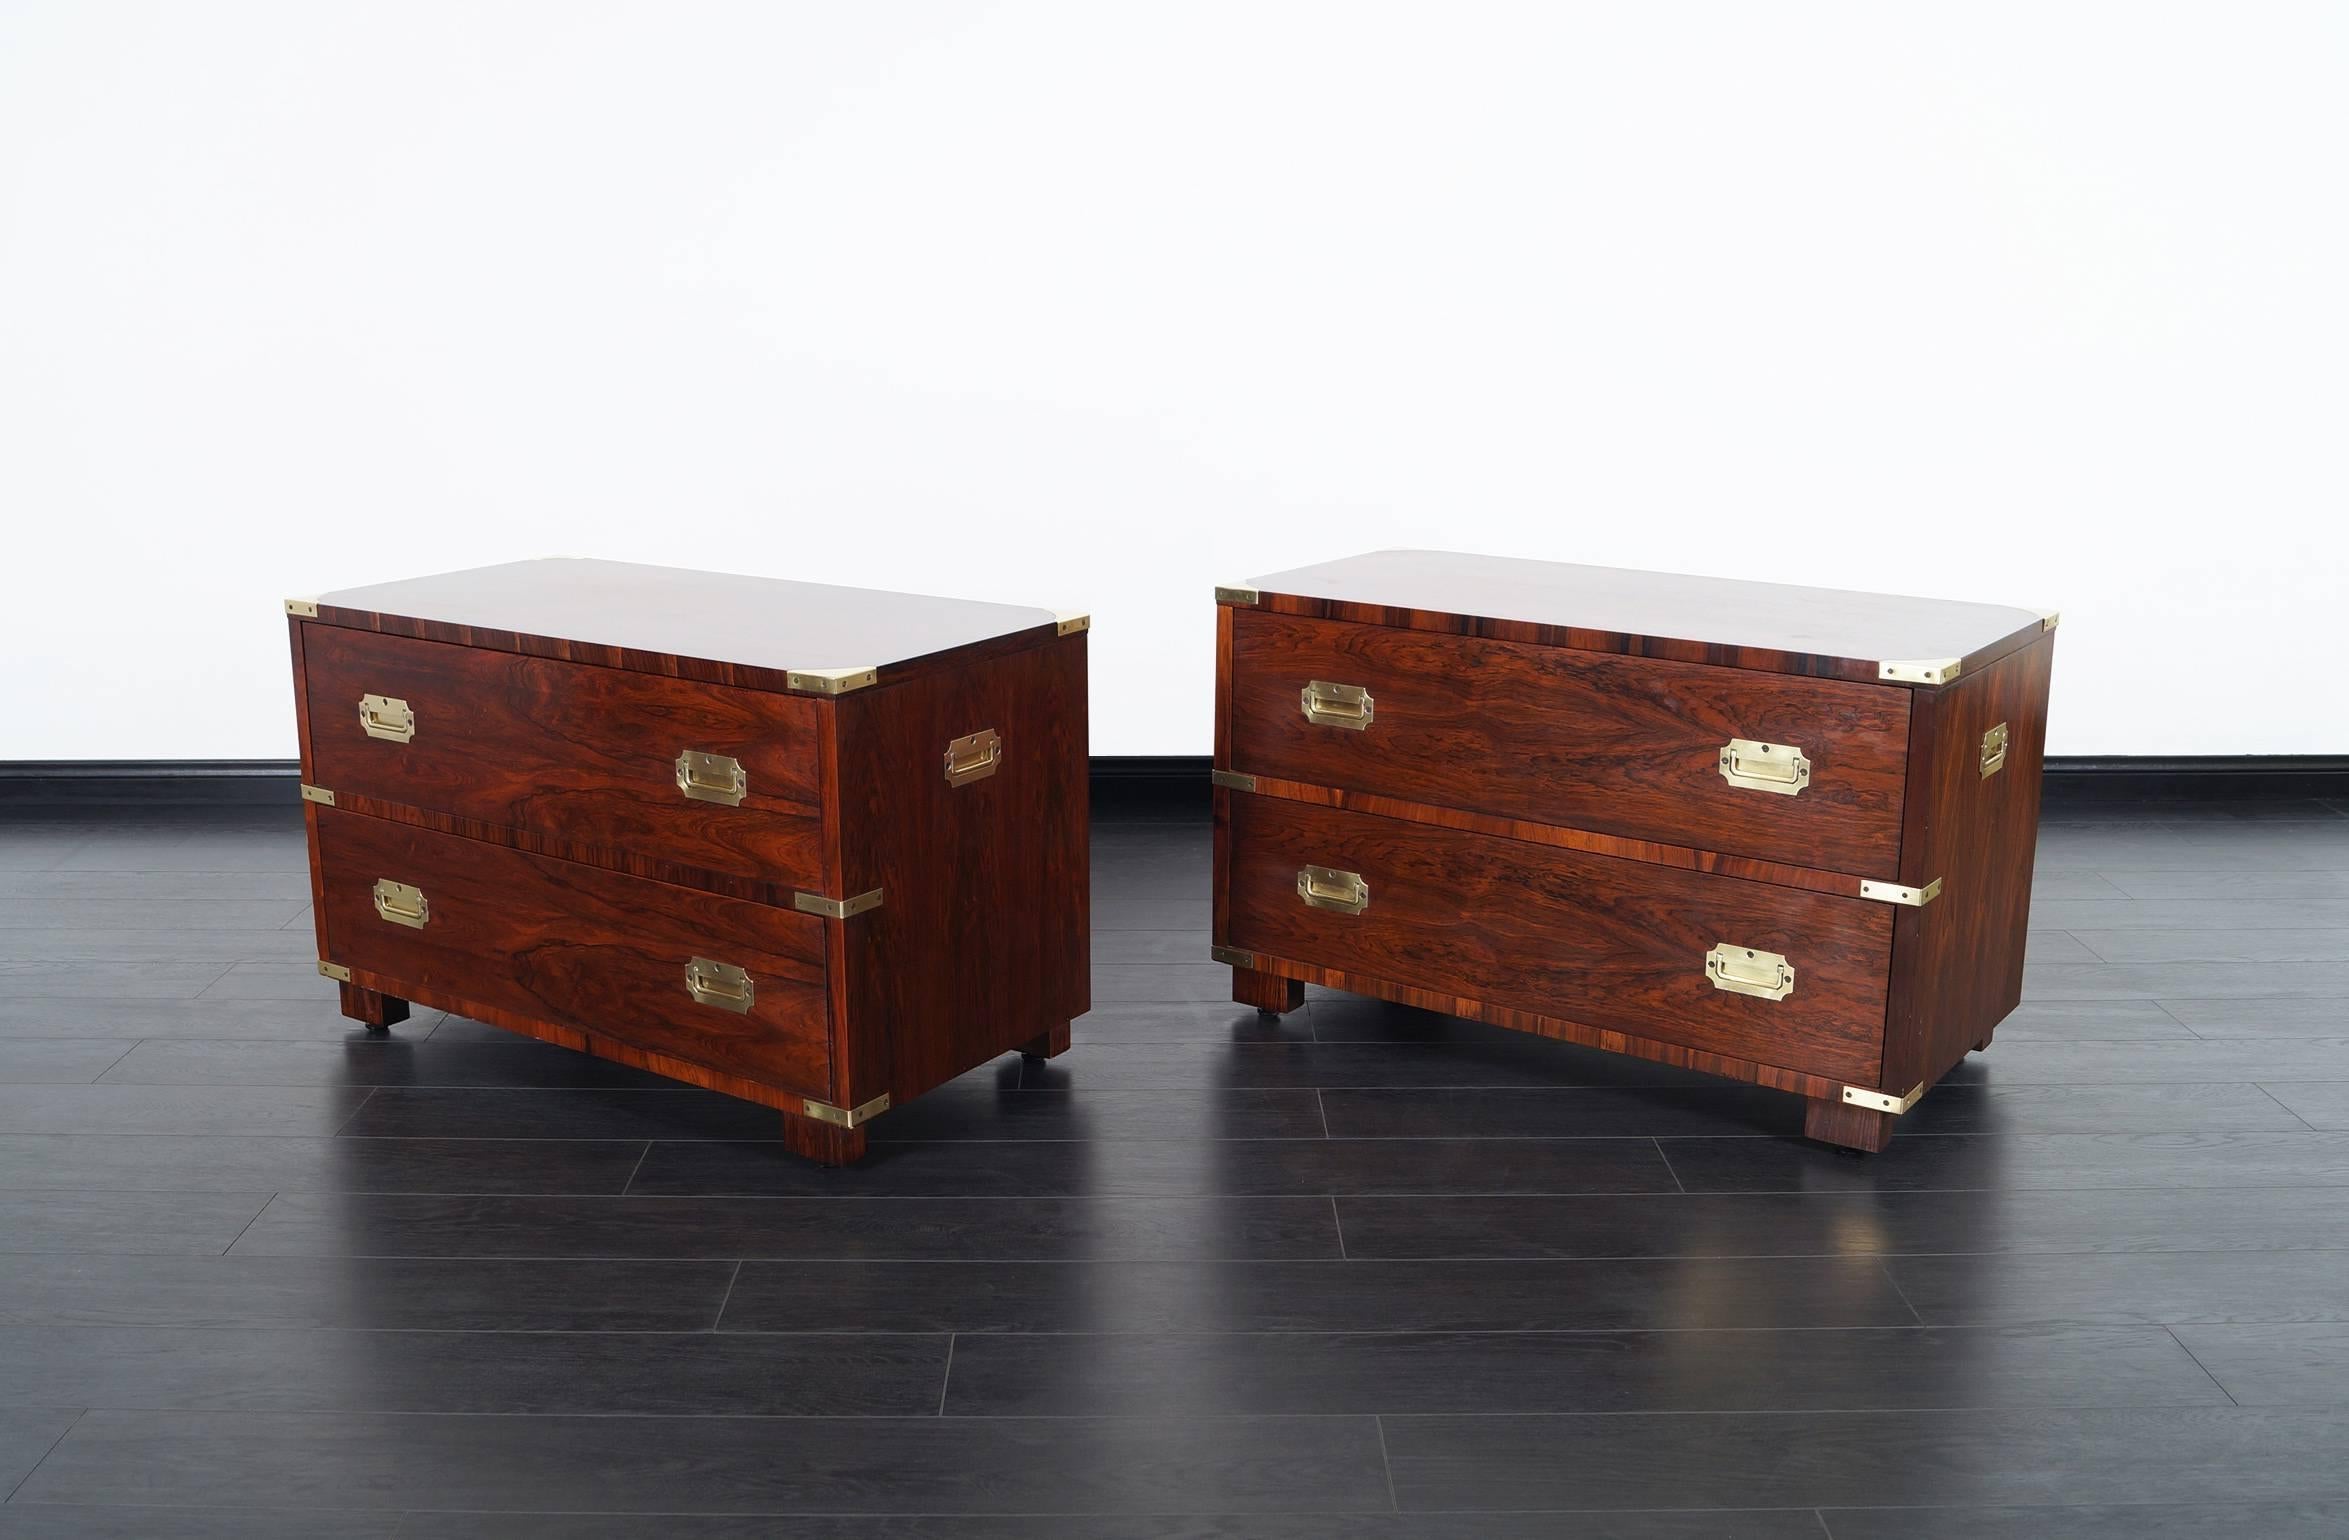 Stunning pair of vintage Brazilian rosewood Campaign style chest of drawers by John Stuart. Each chest features two drawers with solid brass hardware. This is absolutely one of the most well crafted Campaign style chests ever made, with no expense